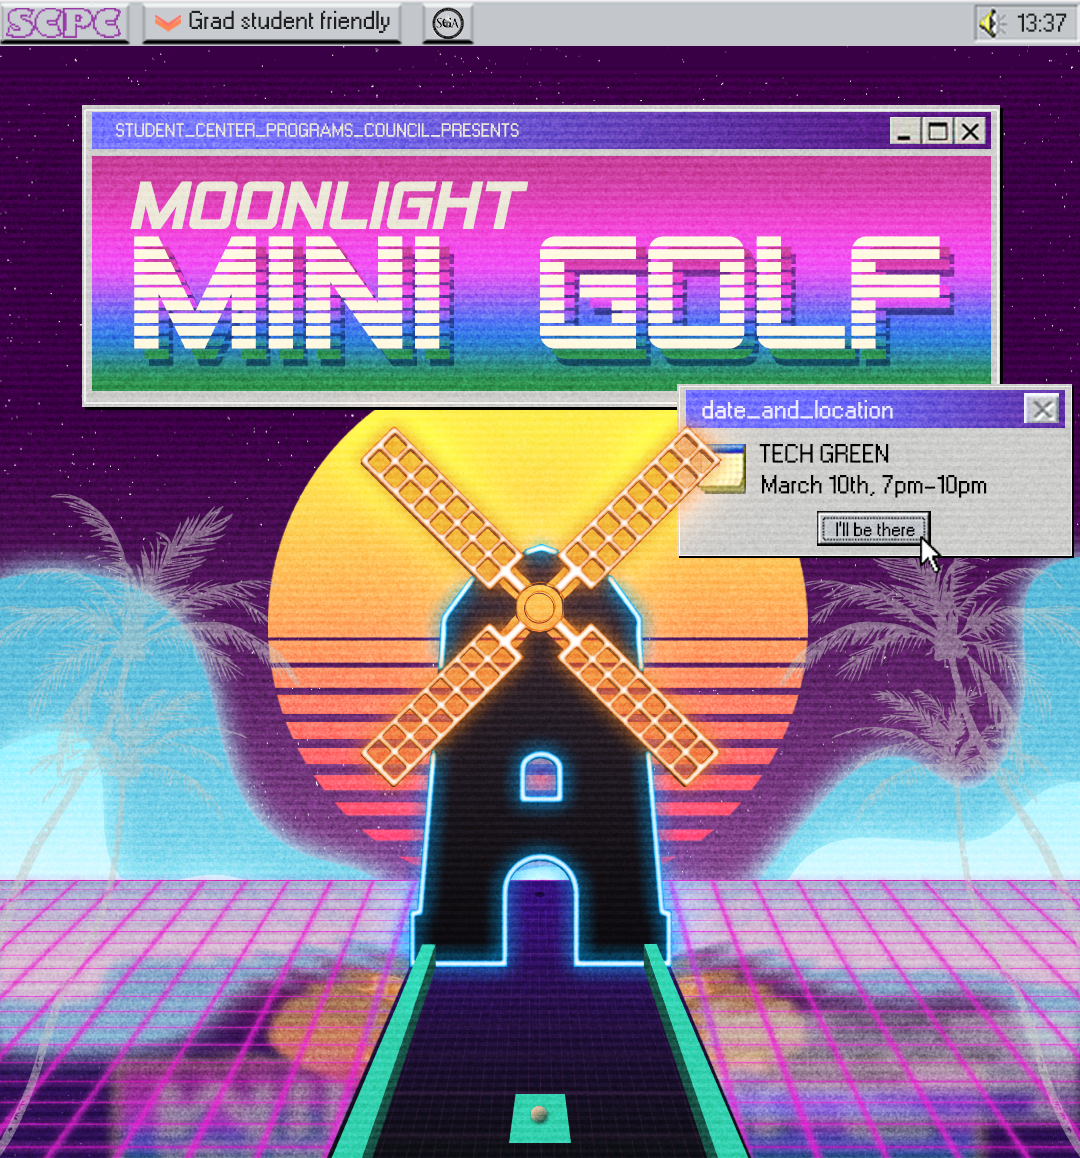 Do you know what's better than mini golf? Glow-in-the-dark Mini Golf! Swing by Tech Green on the evening of Friday, March 10th, from 7:00PM to 10:00 PM to enjoy our twist on mini golf alongside some refreshments! 